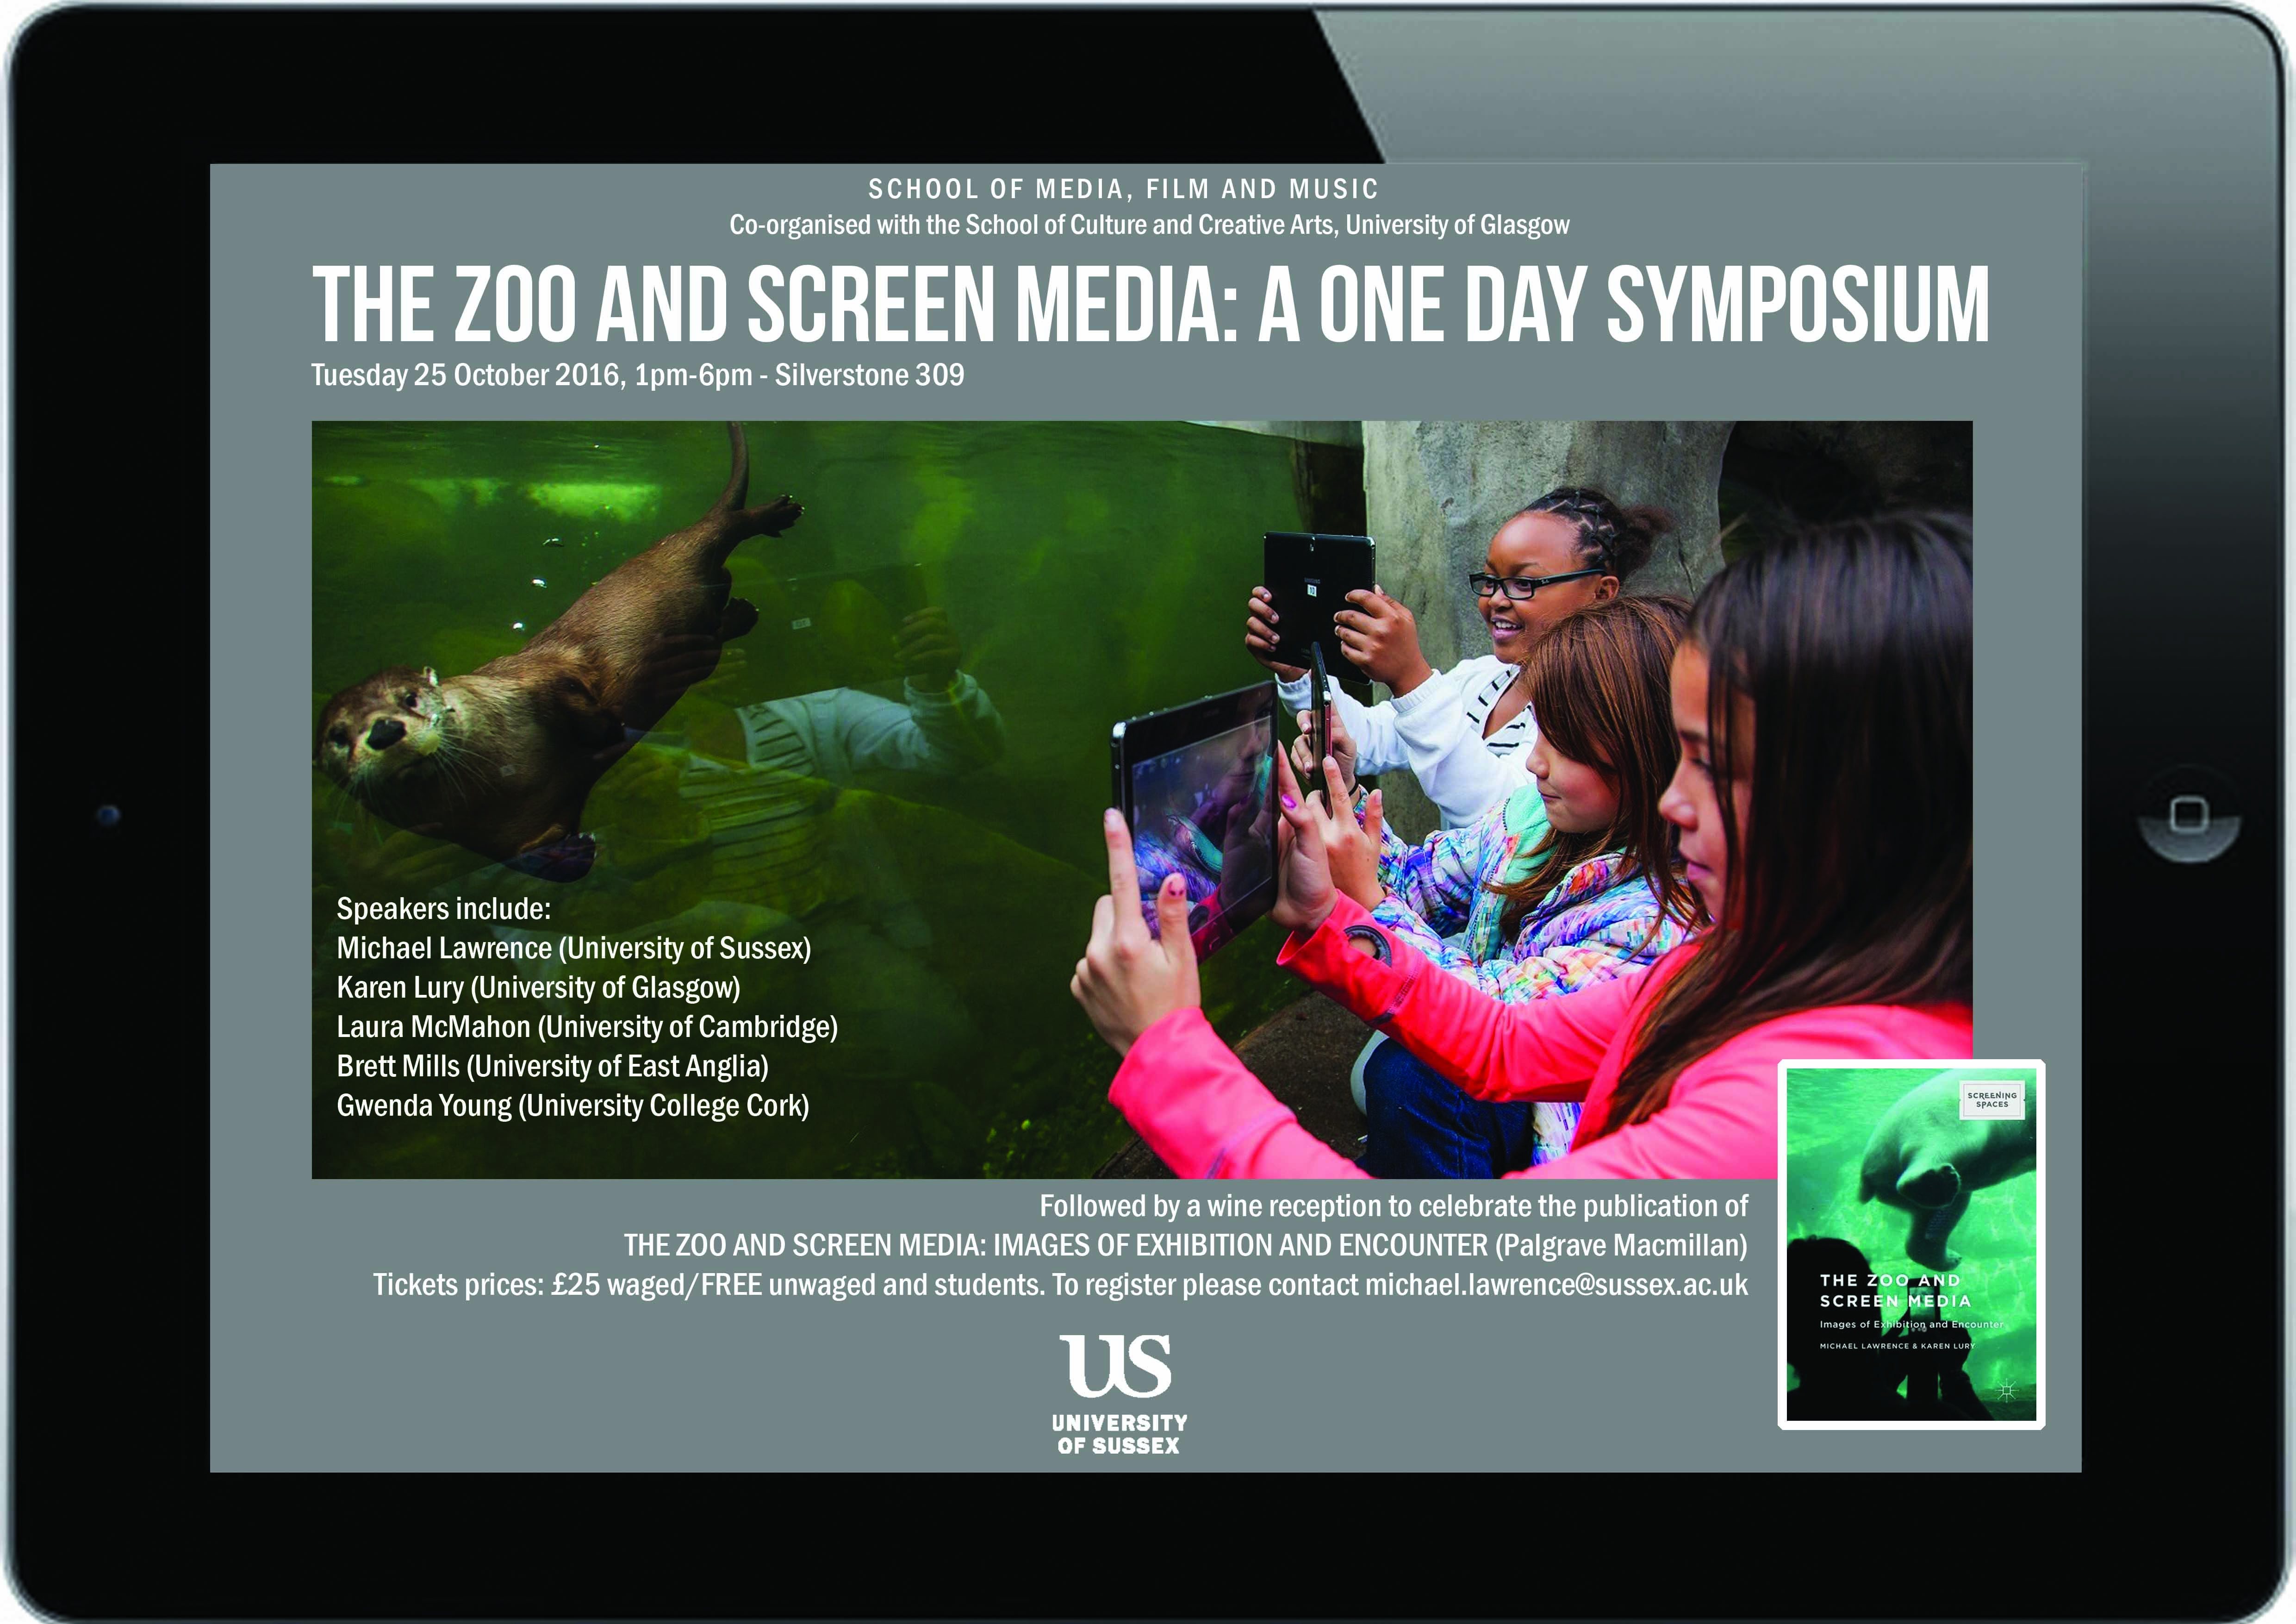 The Zoo and Screen Media: A One Day Symposium. Tuesday 25th Oct, 1-6pm.